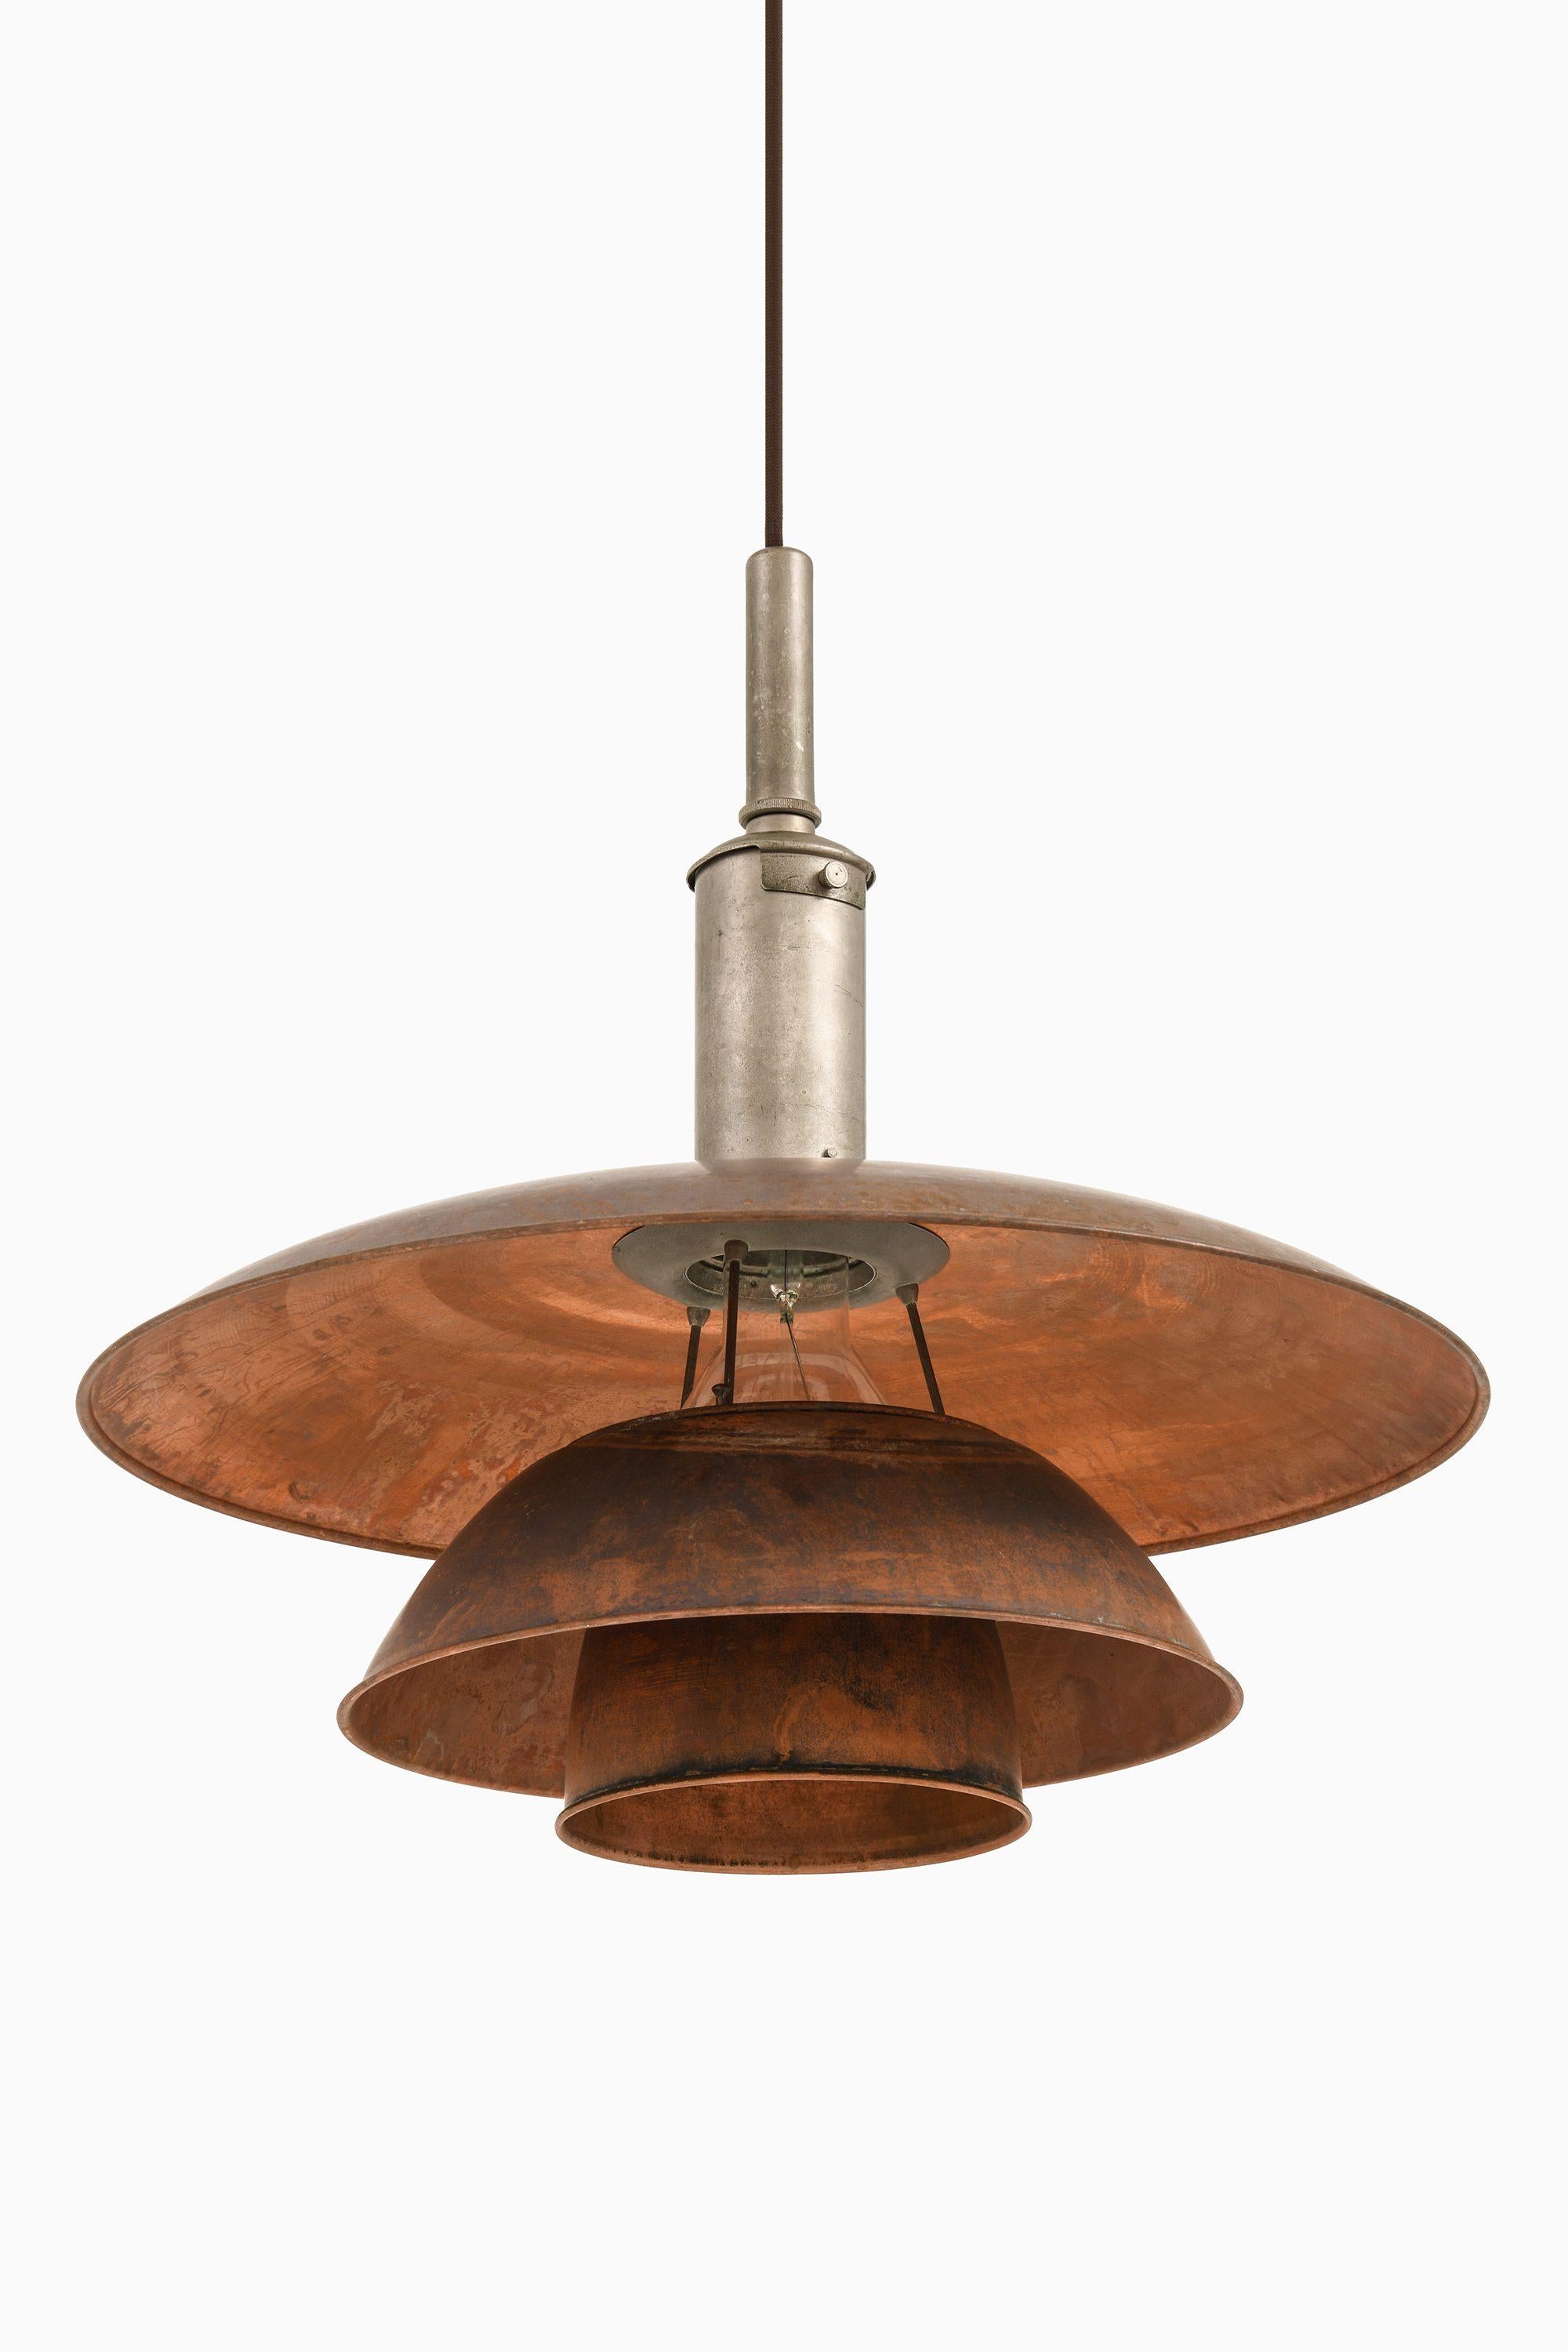 Ceiling Lamp in Copper and Nickel Plated Steel by Poul Henningsen, 1920's

Additional Information:
Material: Copper, nickel plated steel
Style: Mid century, Scandinavian
Rare ceiling lamp model PH-5300
Produced by Louis Poulsen in Denmark
Dimensions